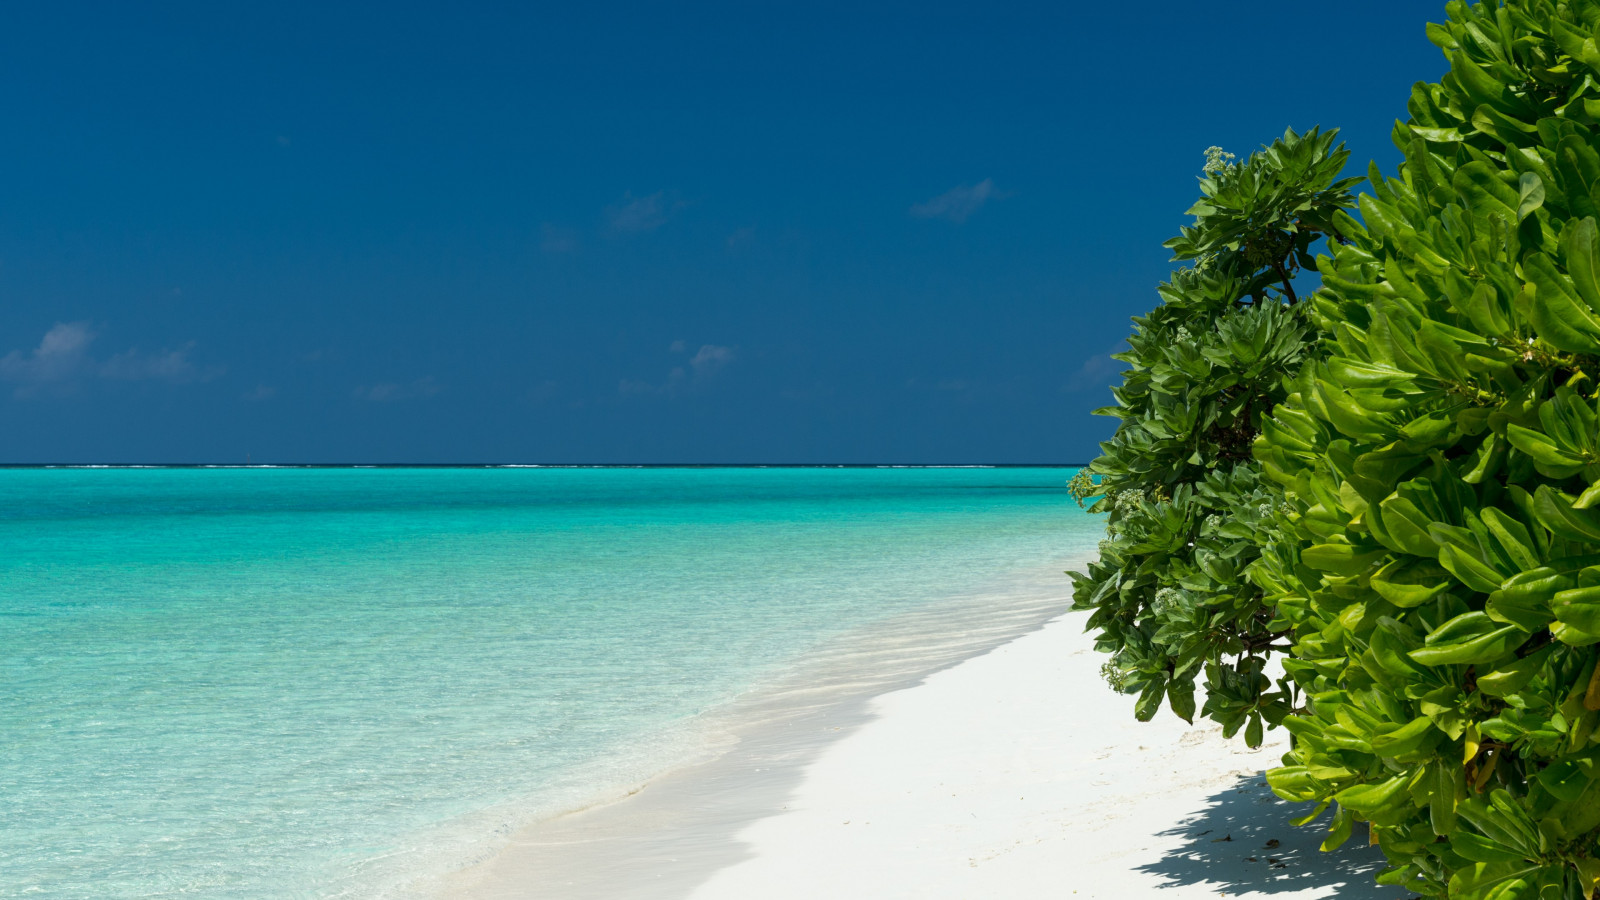 Turquoise waters of Maldives wallpaper 1600x900